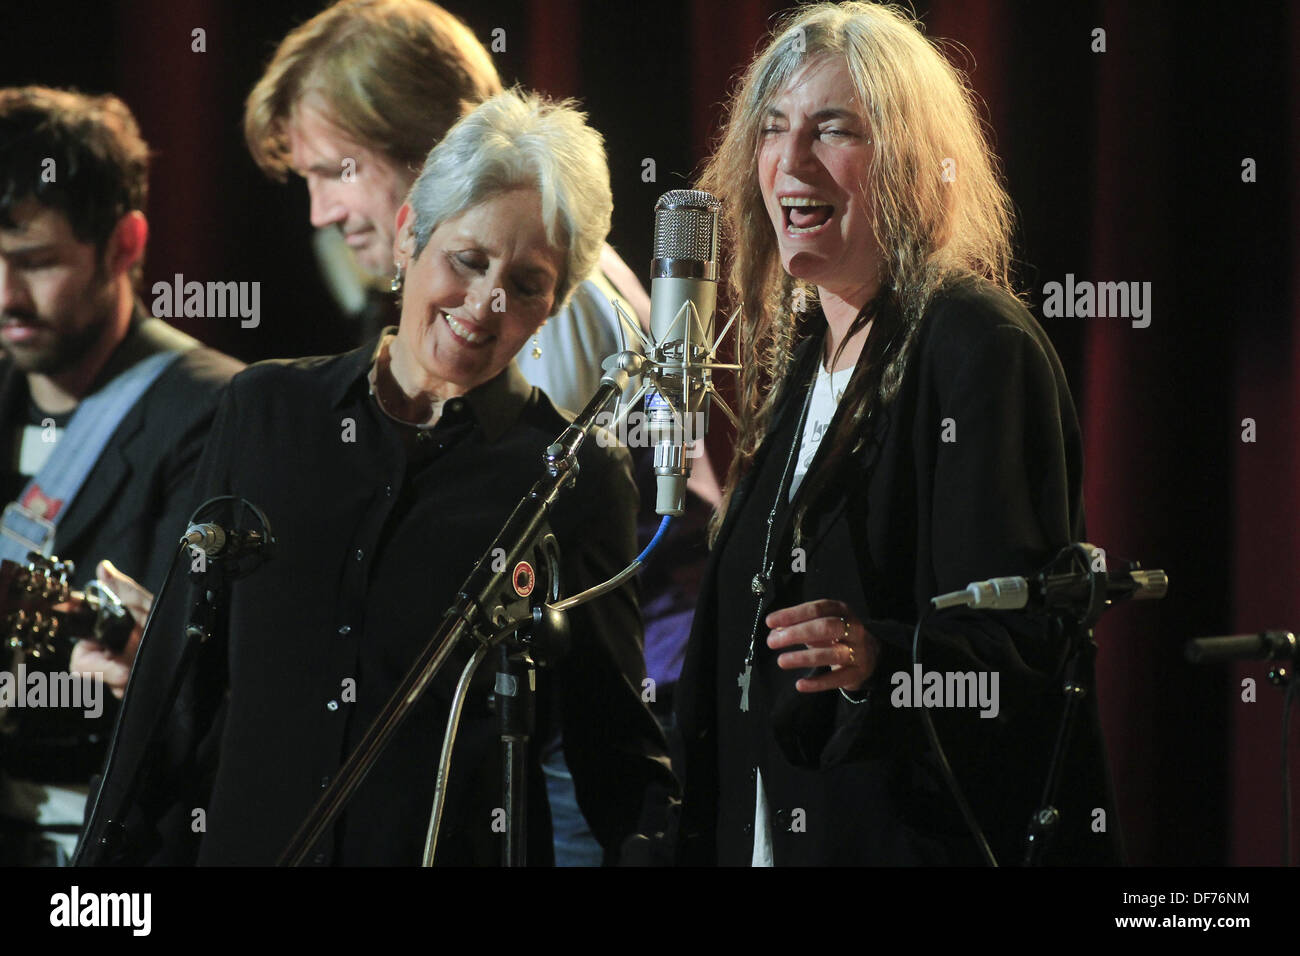 New York, New York, USA. 29th Sep, 2013. Joan Baez and Patti Smith performing during Another Day, Another Time Celebrating the Music of 'Inside Llewyn Davis'' at Town Hall on September 29, 2013 © Rahav Segev/ZUMAPRESS.com/Alamy Live News Stock Photo